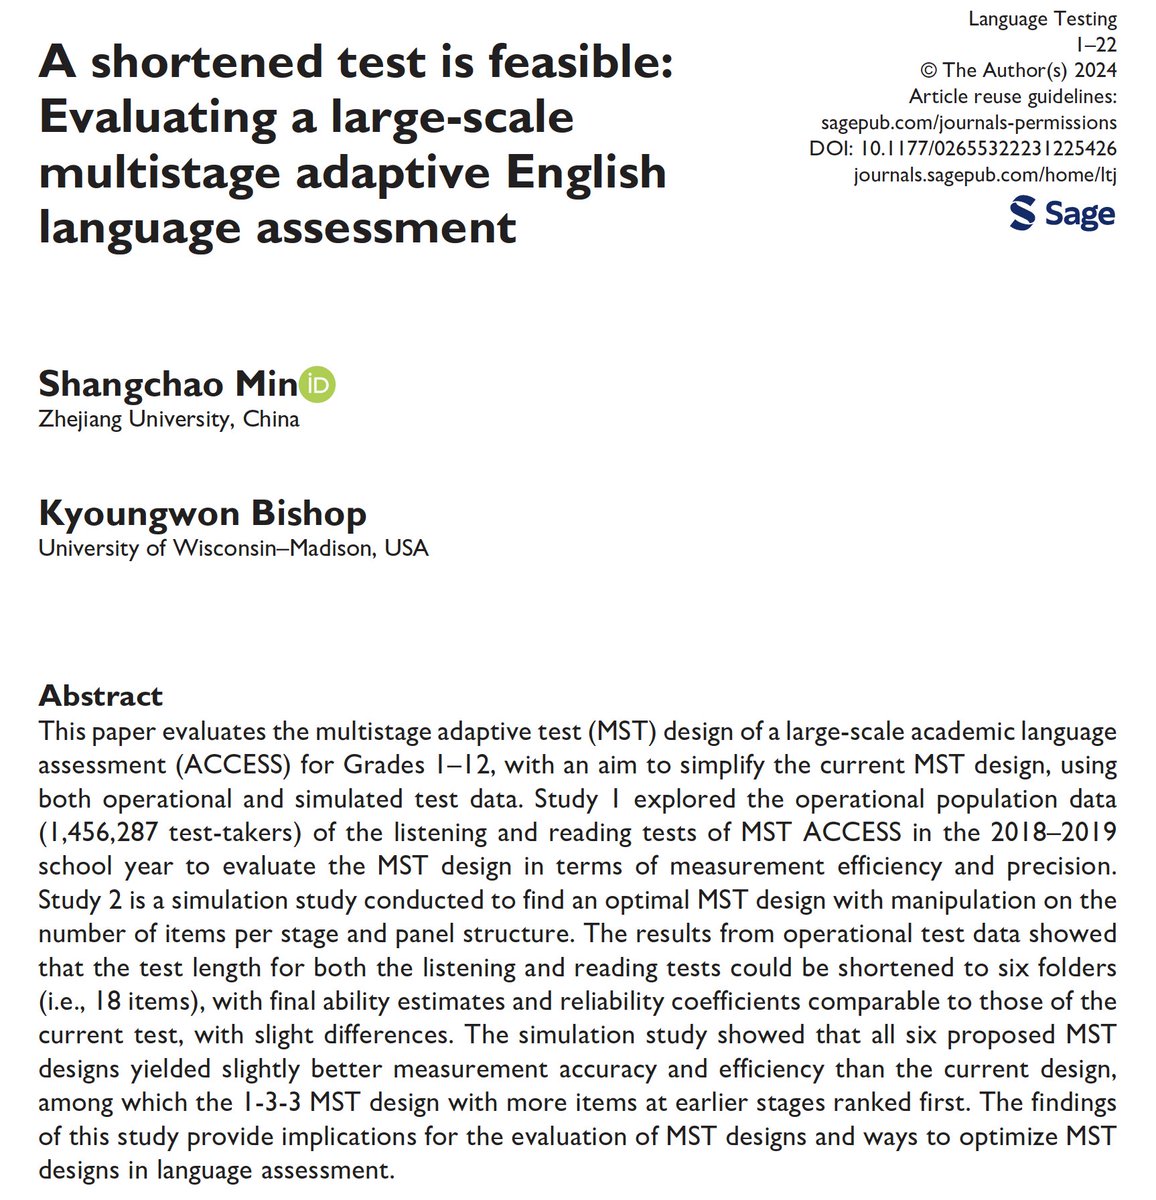 Now available in Online First, Shangchao Min (@ZJU_China) and Kyoungwon Bishop (@UWMadison) evaluate the multistage adaptive test design of ACCESS, a language proficiency test for English learners in Grades 1-12. journals.sagepub.com/doi/10.1177/02…